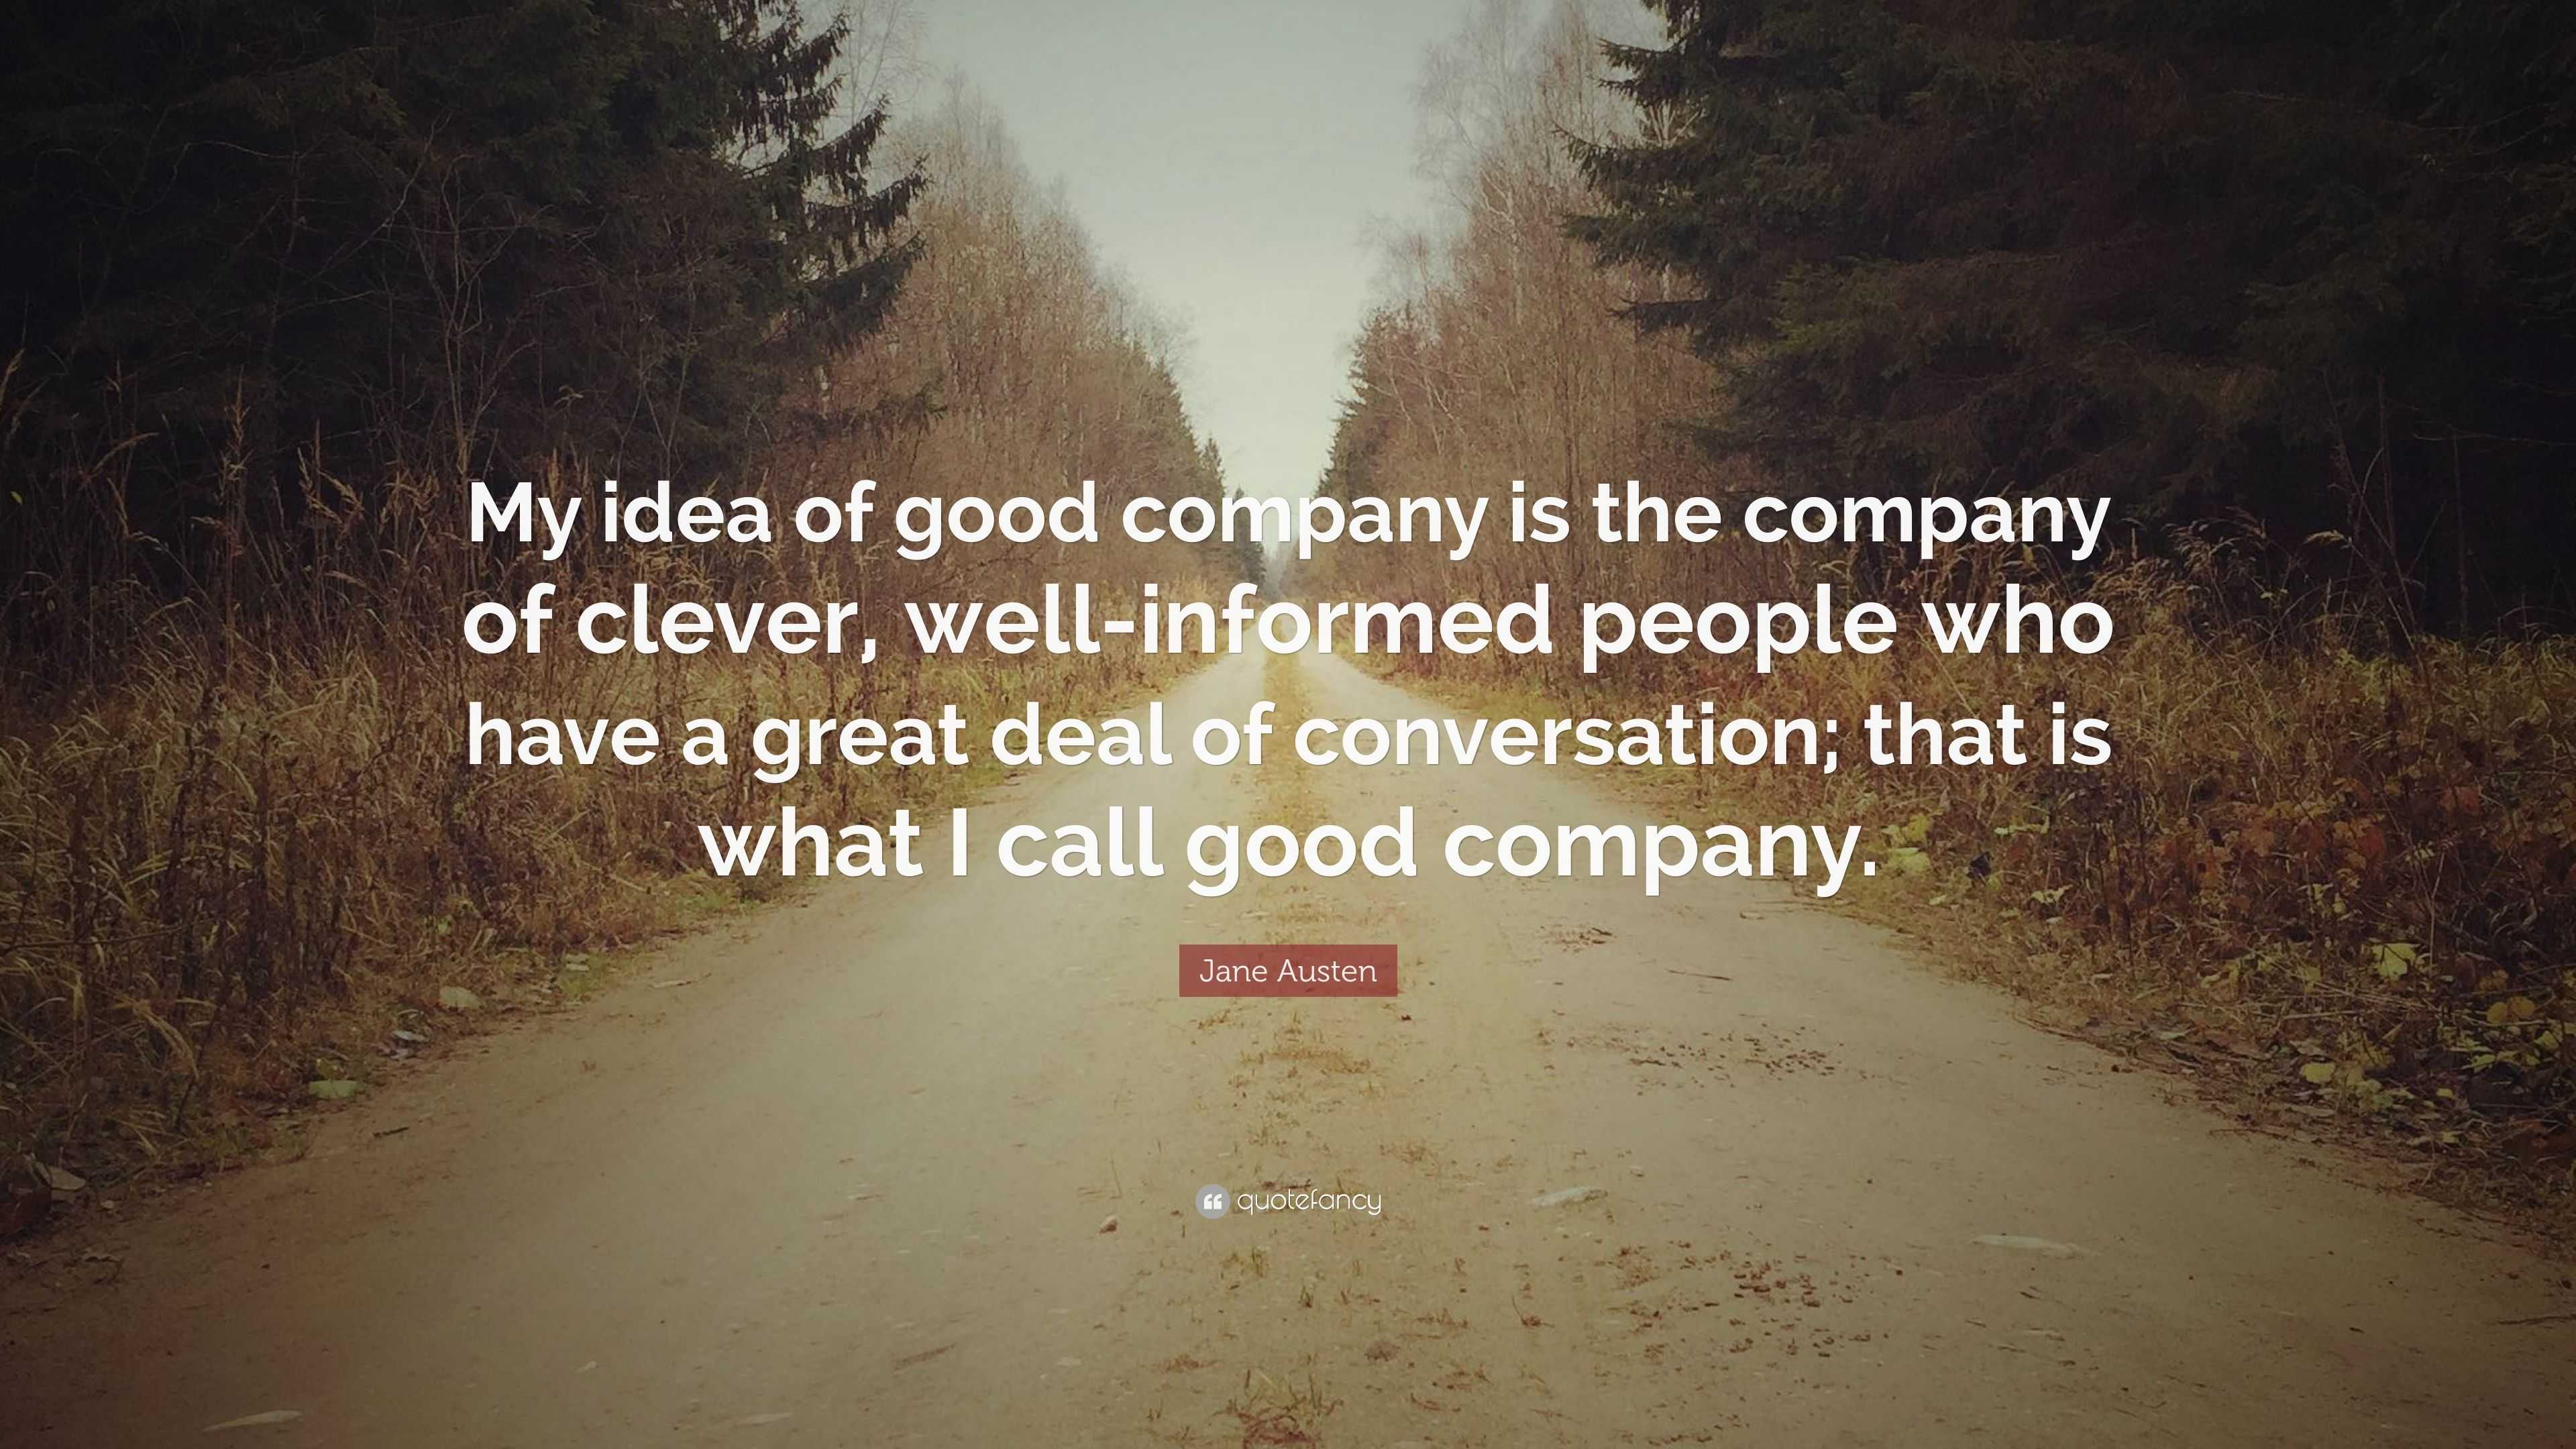 Jane Austen Quote: “My idea of good company is the company of clever